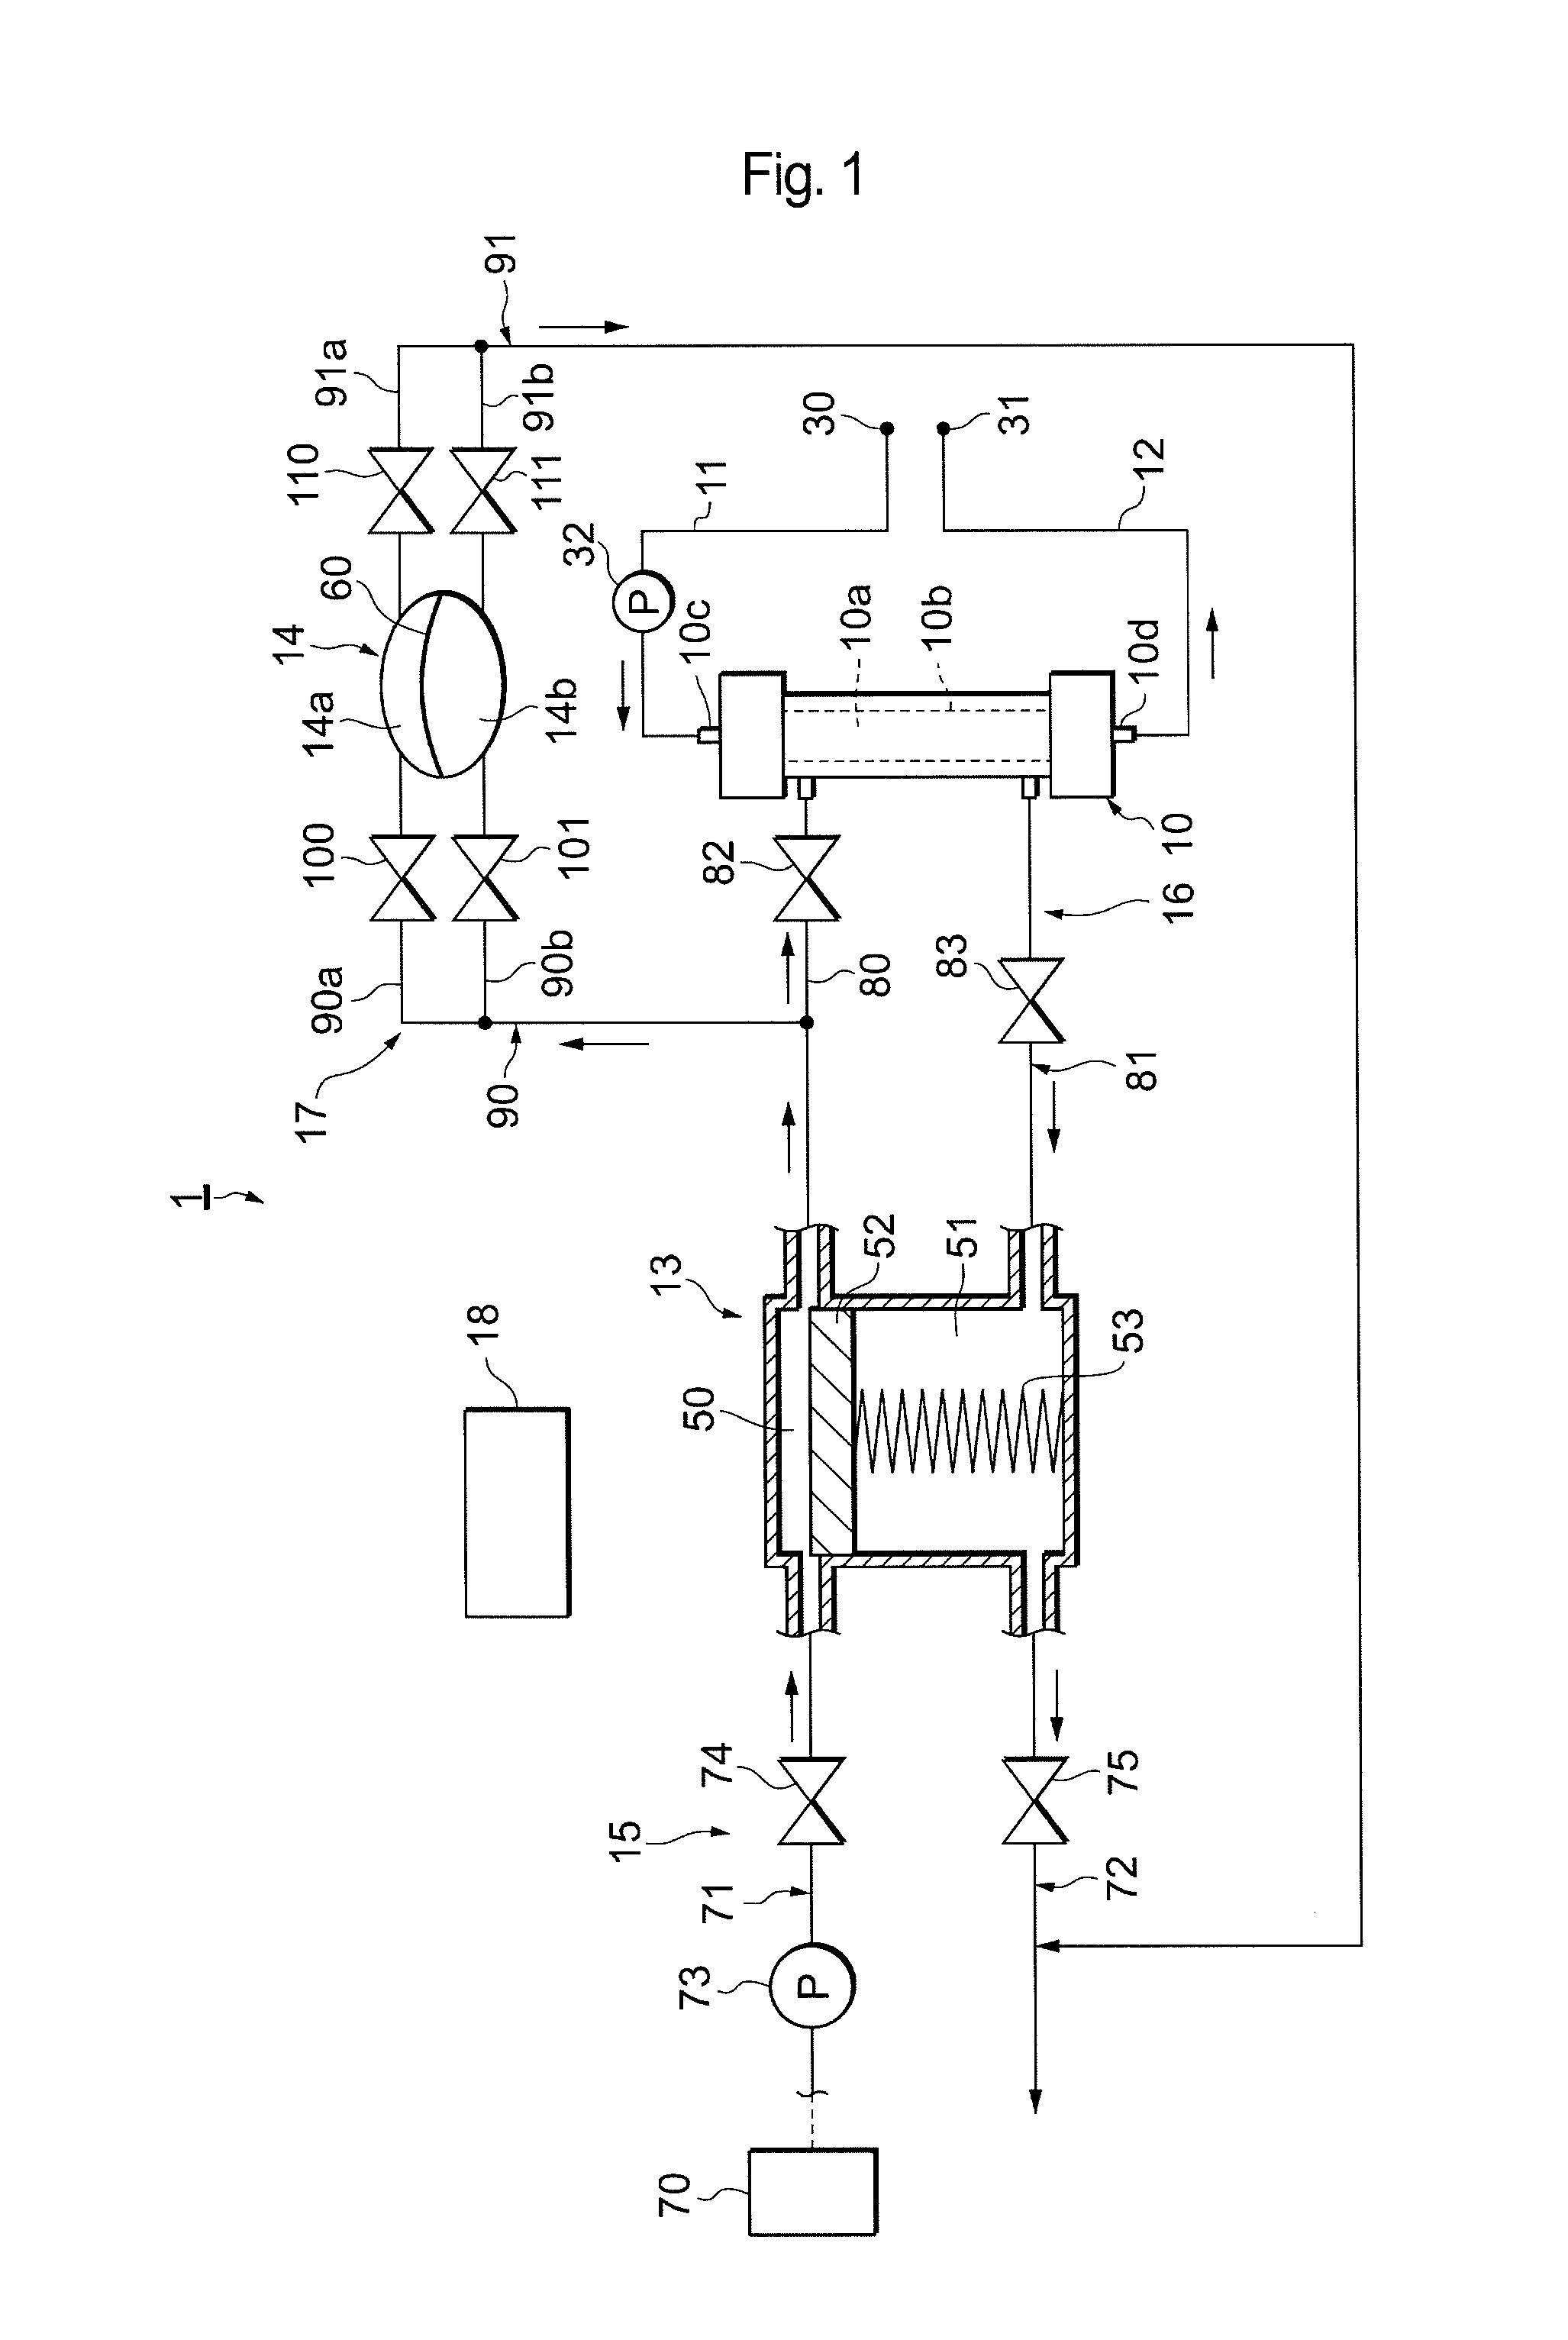 Hemodialysis apparatus, method of operating hemodialysis apparatus, and water content removal system